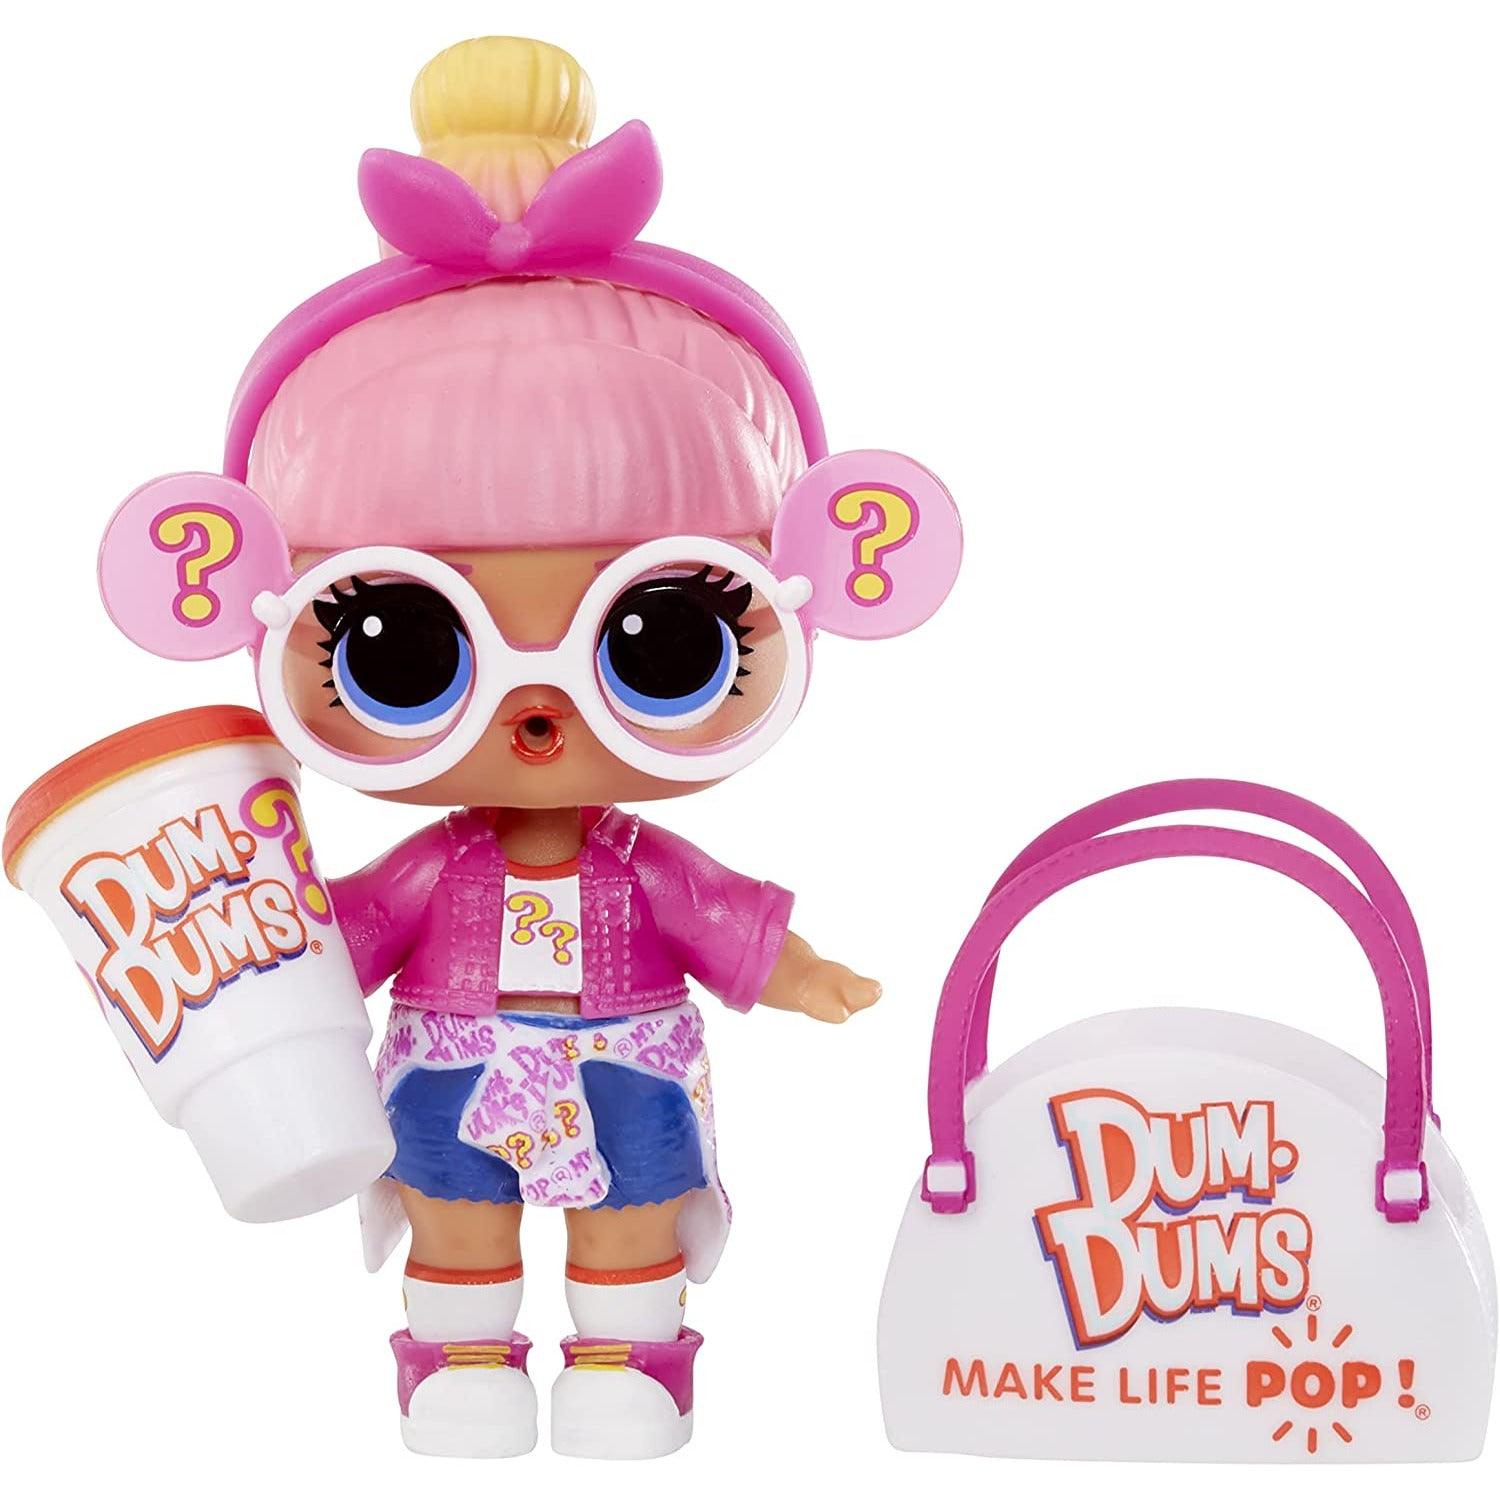 LOL Surprise Loves Mini Sweets Dolls with 8 Surprises in Paper Ball, Candy Theme, Accessories - BumbleToys - 5-7 Years, Dolls, Girls, L.O.L, Miniature Dolls & Accessories, OXE